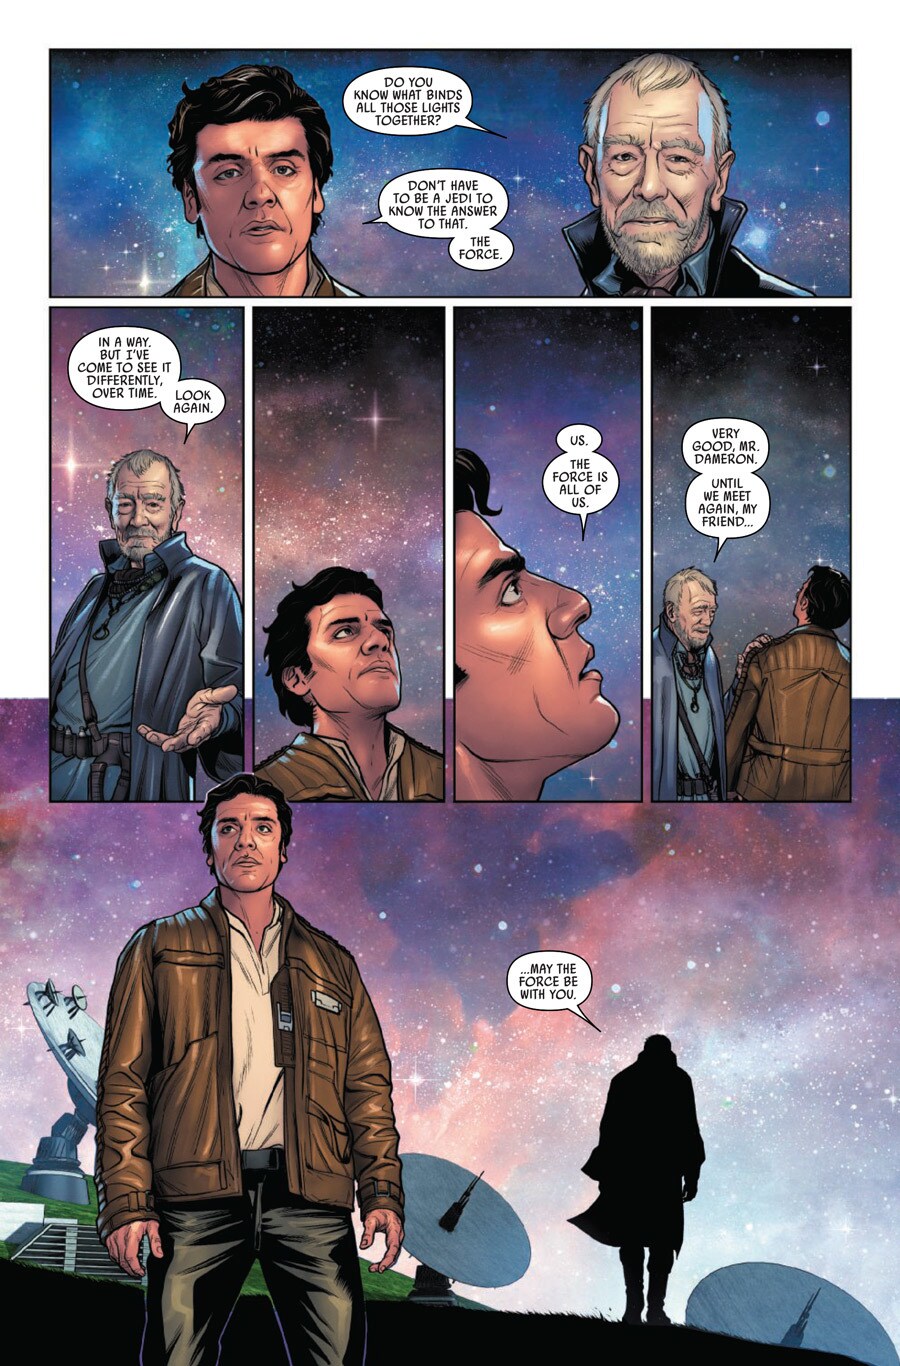 Poe Dameron learns about the Force,in a scene from his self-titled comic.